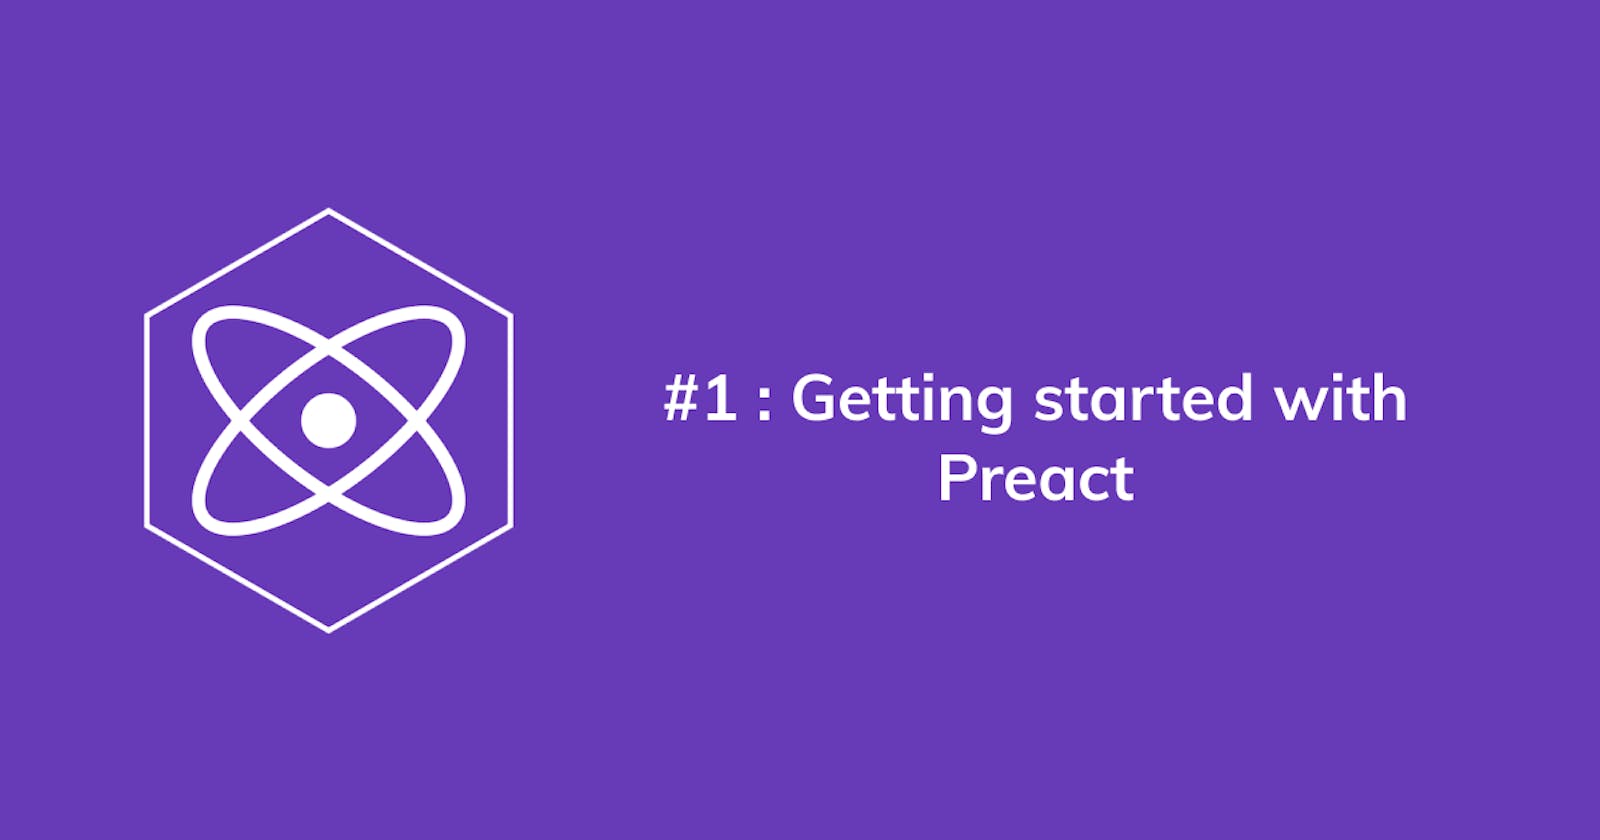 #1 Getting started with Preact - Preact Series